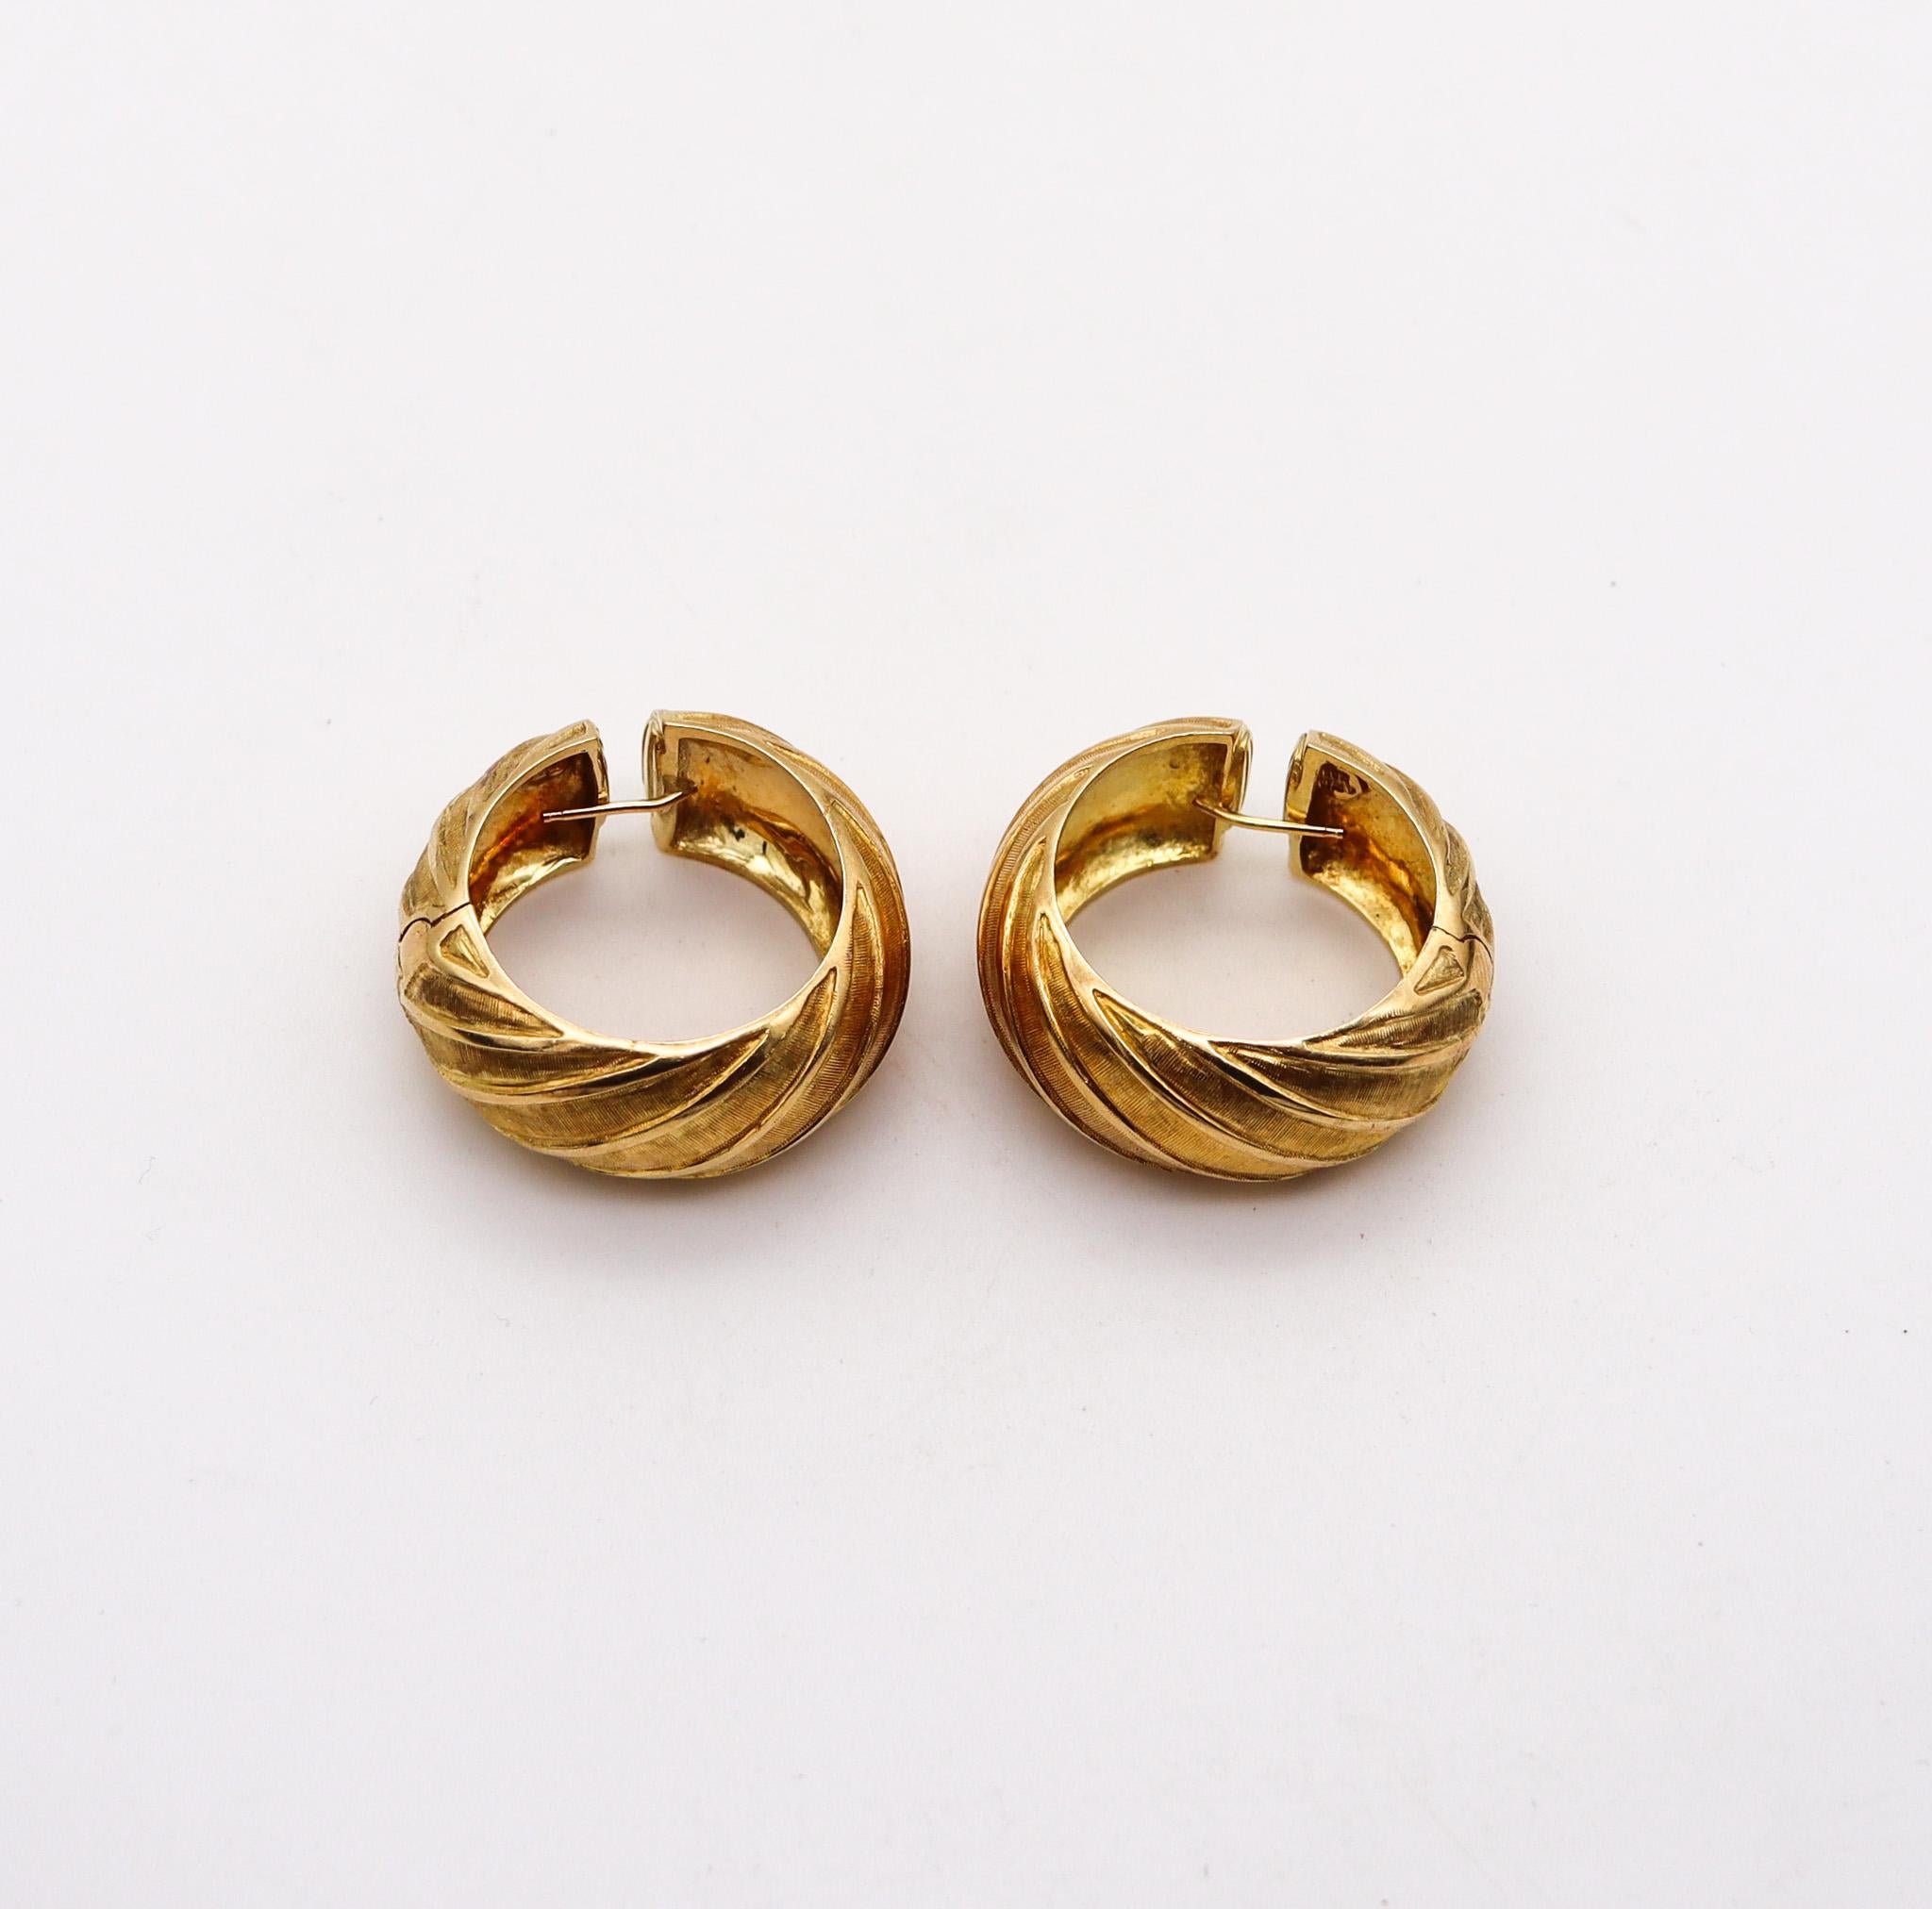 Carlo Weingrill 1960 Verona Hoops Clips Earrings Textured Solid 18Kt Yellow Gold In Excellent Condition For Sale In Miami, FL